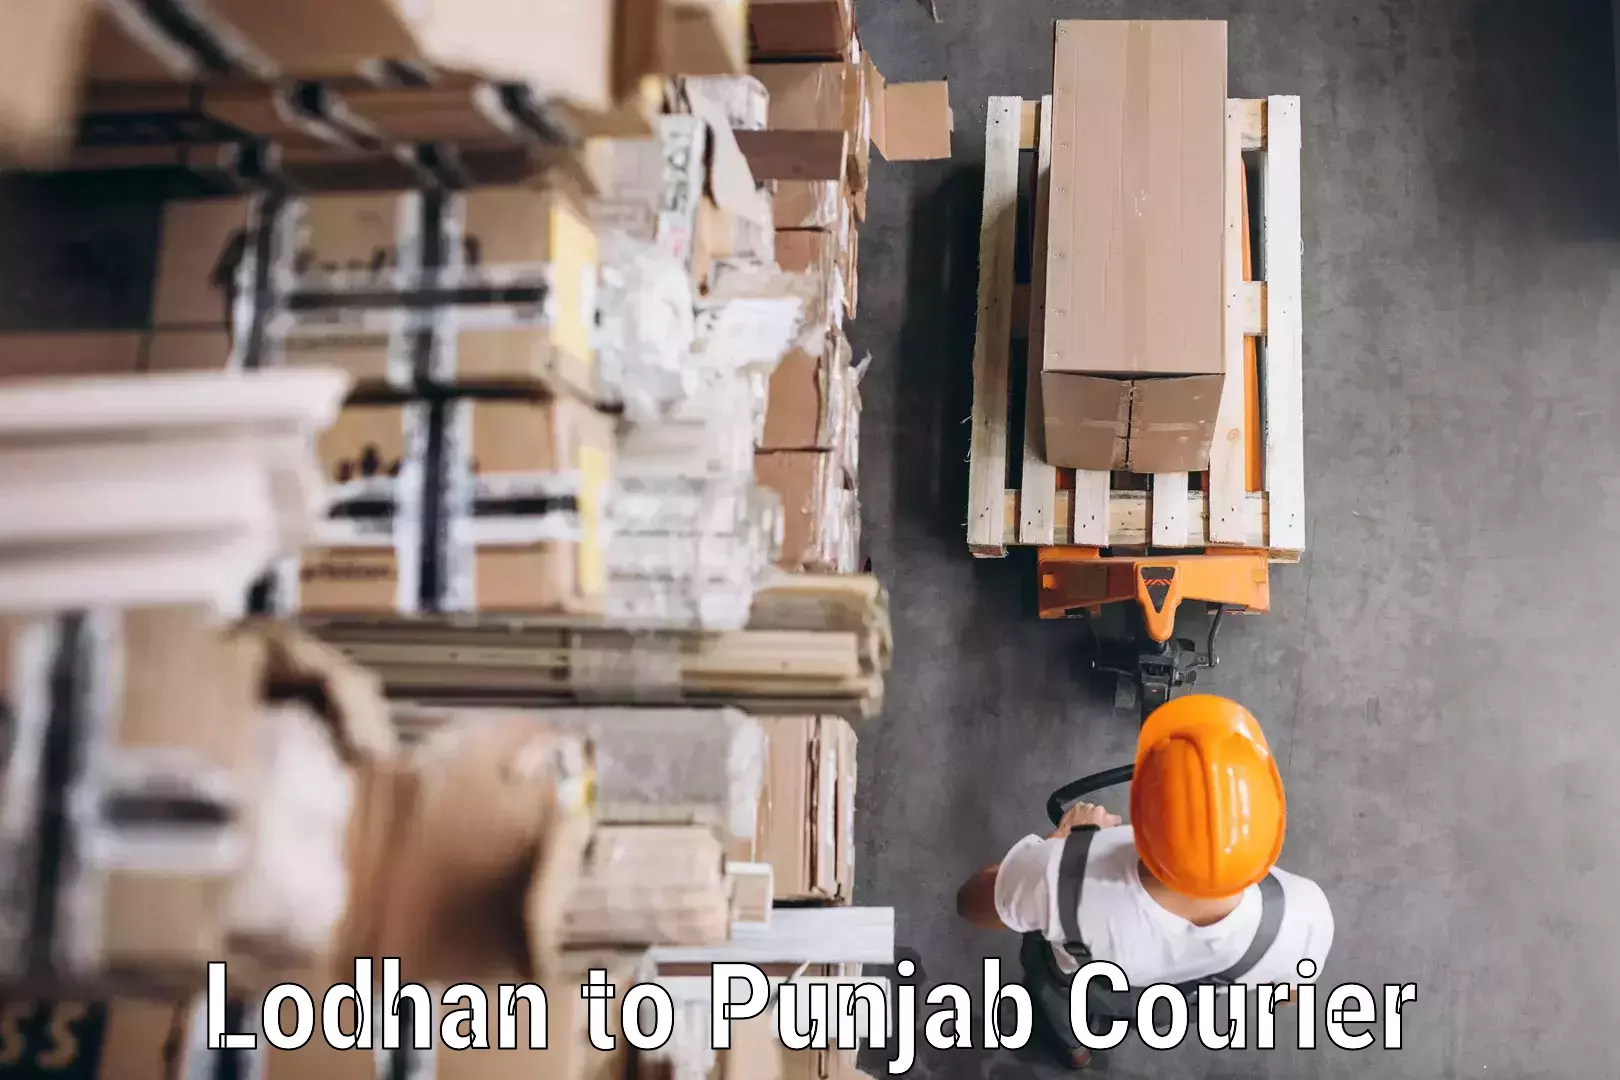 Urgent courier needs Lodhan to Punjab